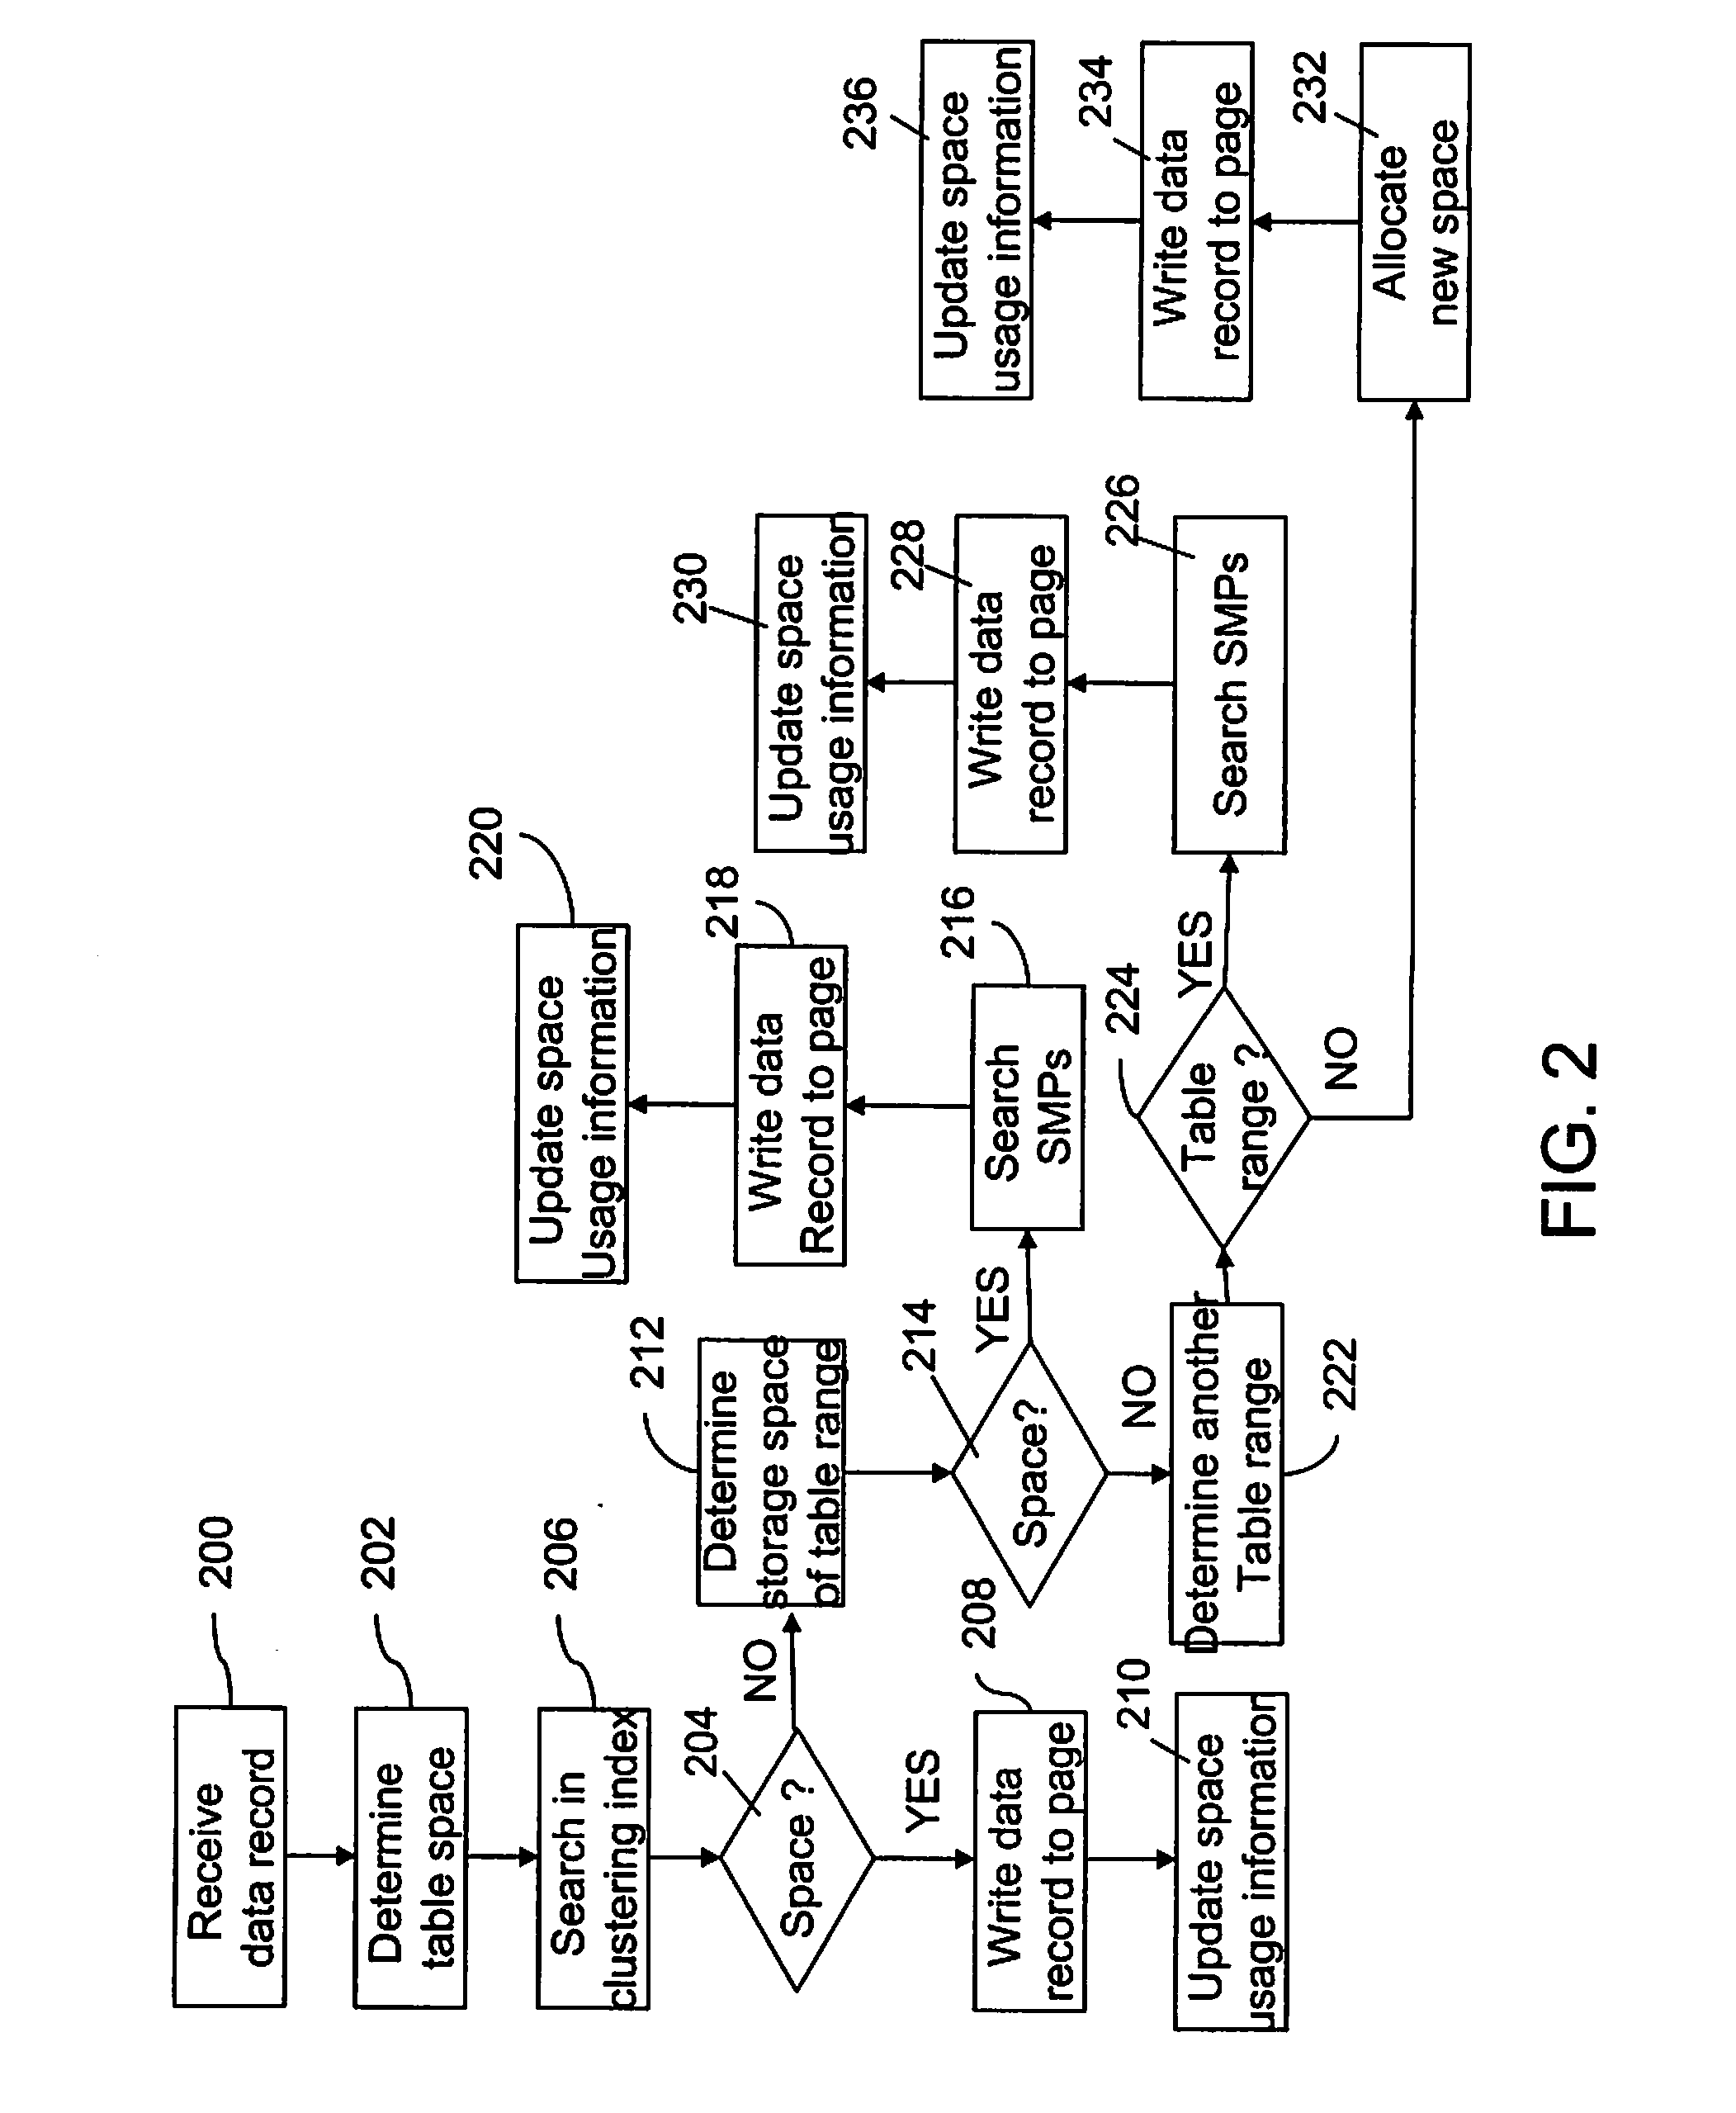 Method for searching a data page for inserting a data record